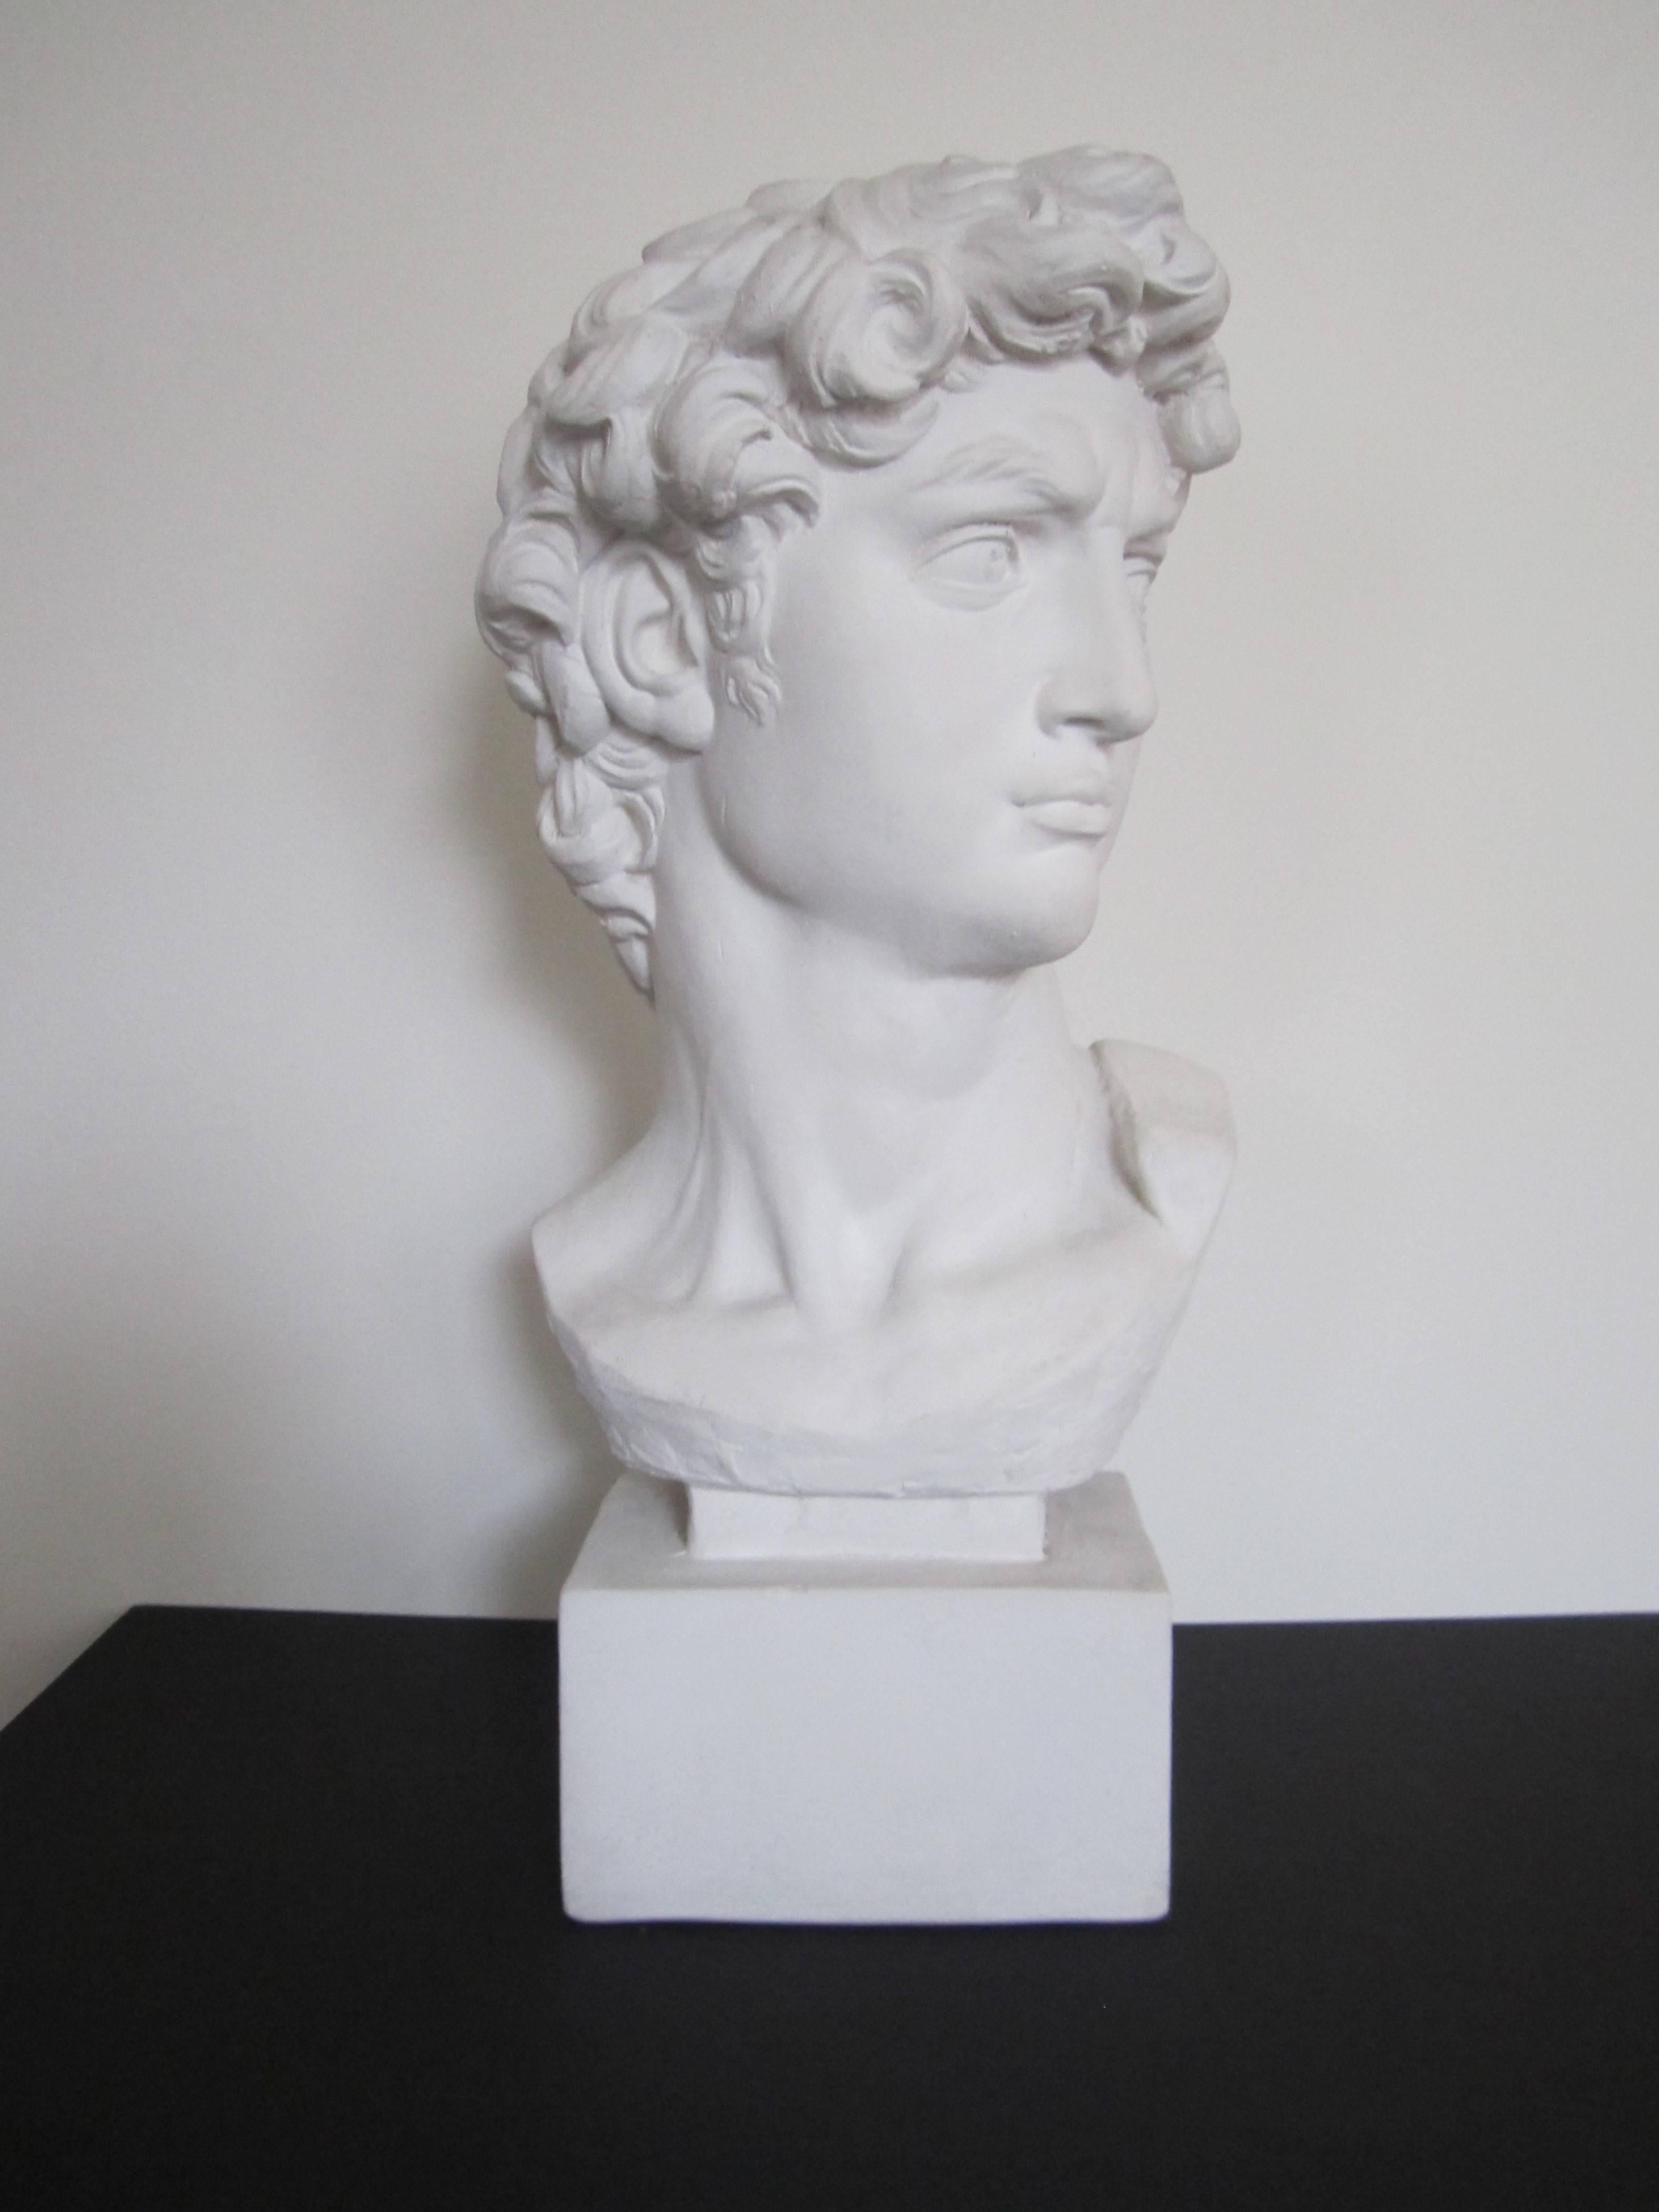 In classical Roman style, a vintage bust of the David. Color is white.
Item available here online. By request, item can be made available by appointment to the Trade (in New York.) Alternatively, by request, item can be made available for viewing